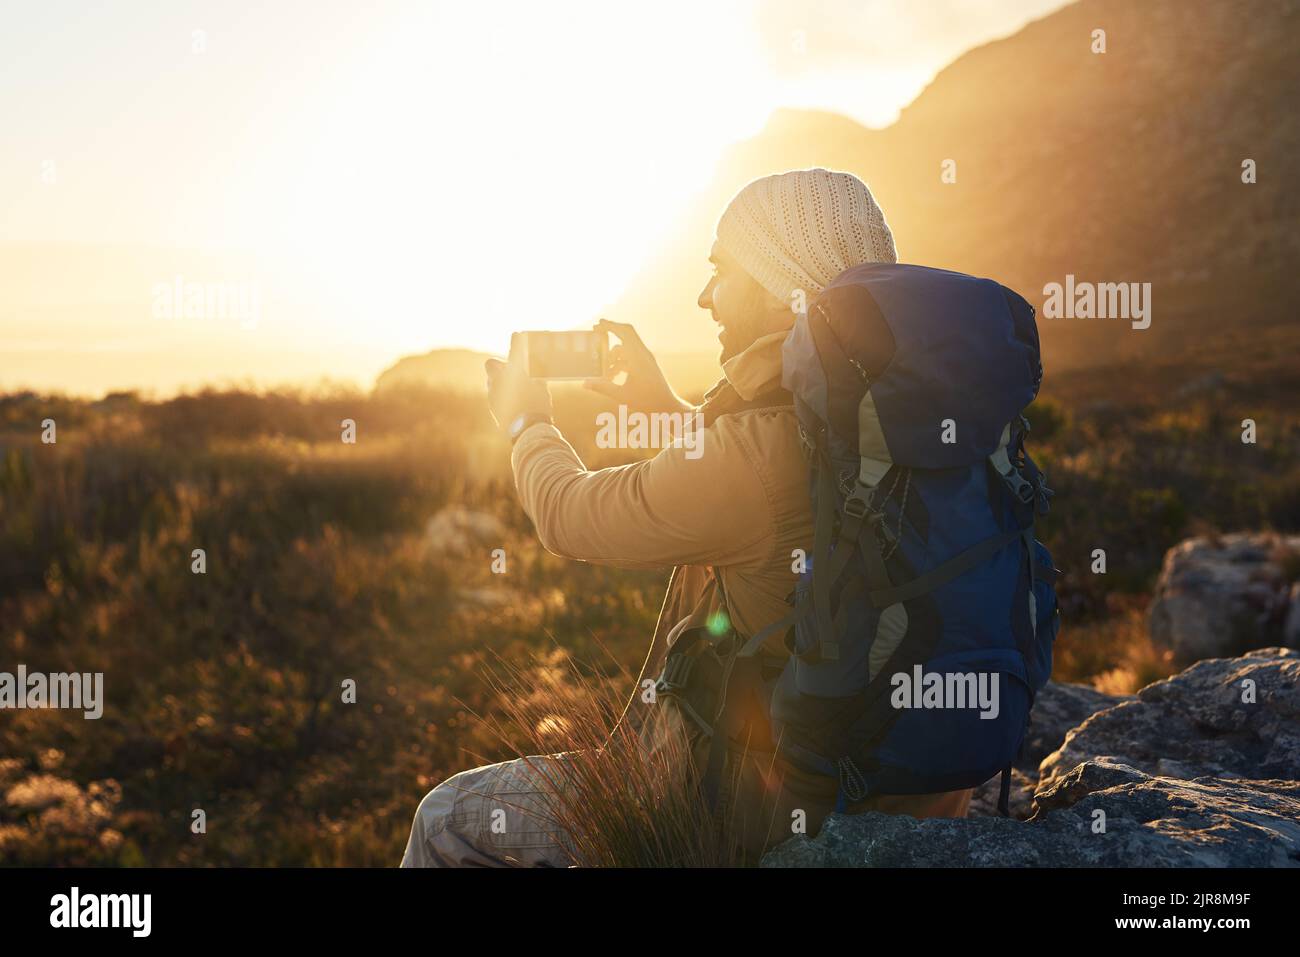 The perfect morning to capture this view. a hiker on top of a mountain capturing pictures of the view. Stock Photo